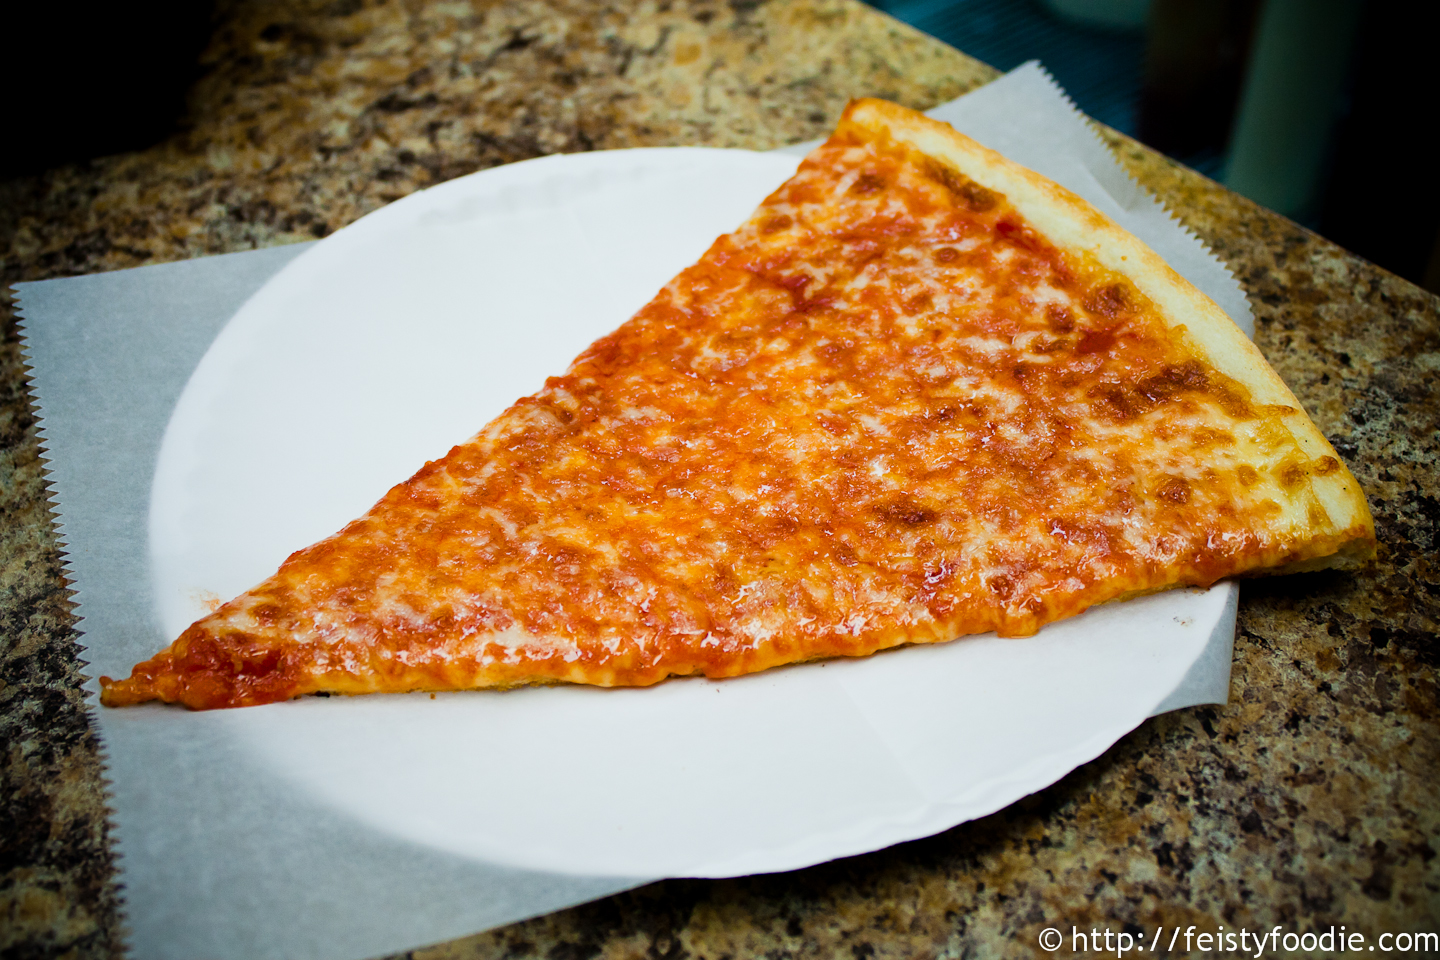 lucias 08 The 5 Best Slices Of Pizza In Queens